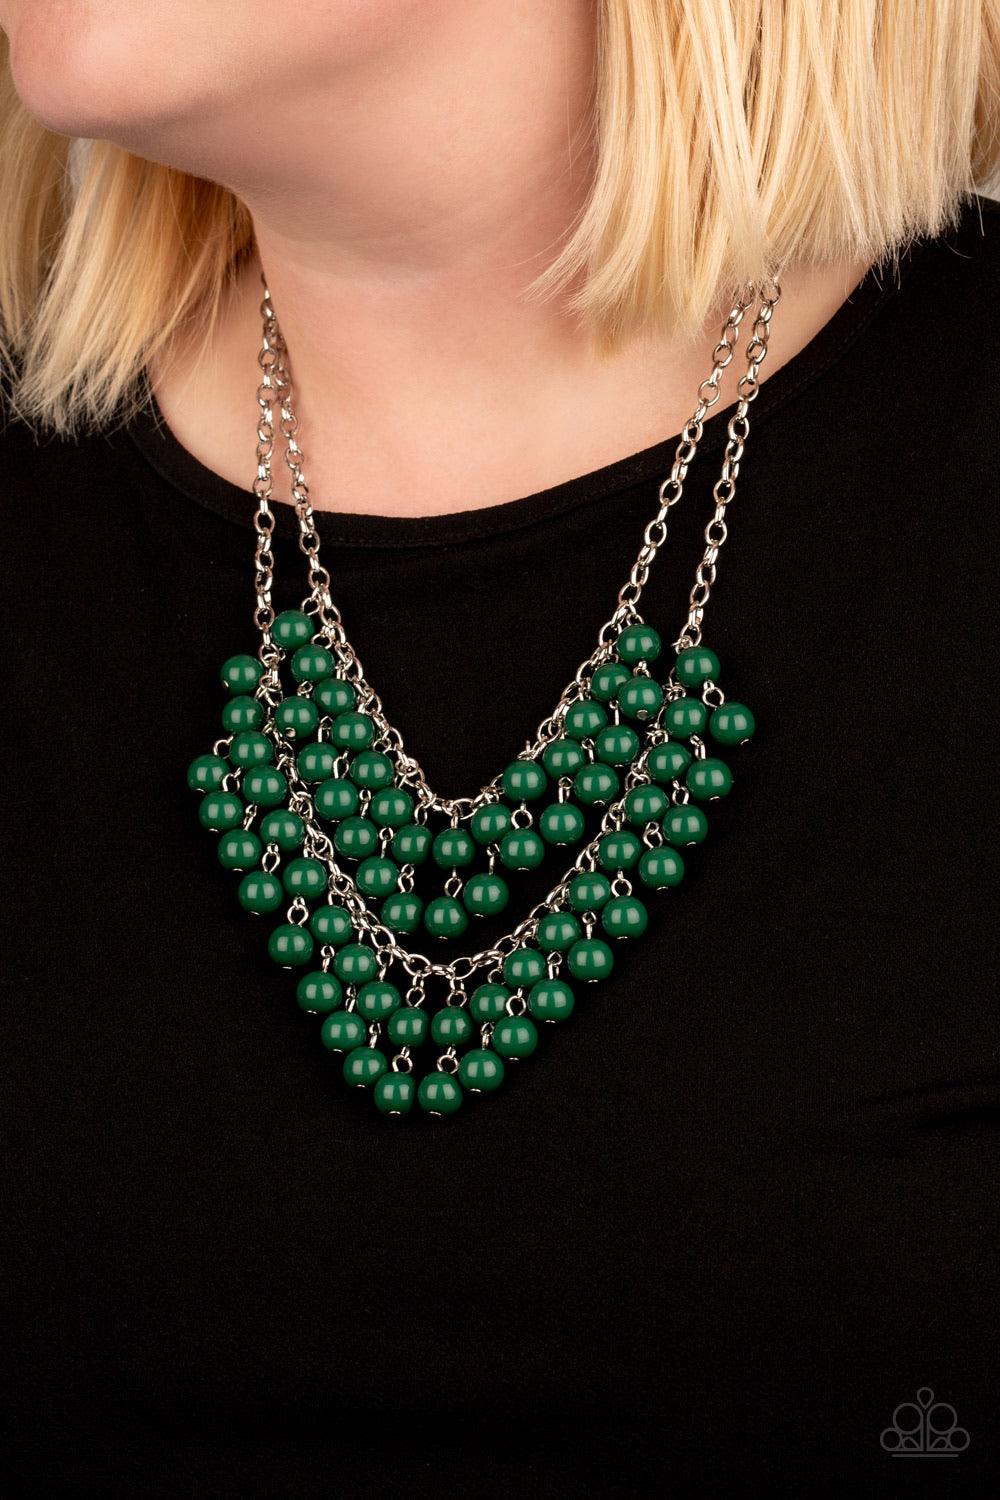 Paparazzi Accessories Bubbly Boardwalk - Green Pairs of green beads cascade from the bottoms of two silver chains, creating a vivaciously layered fringe below the collar. Features an adjustable clasp closure. Sold as one individual necklace. Includes one